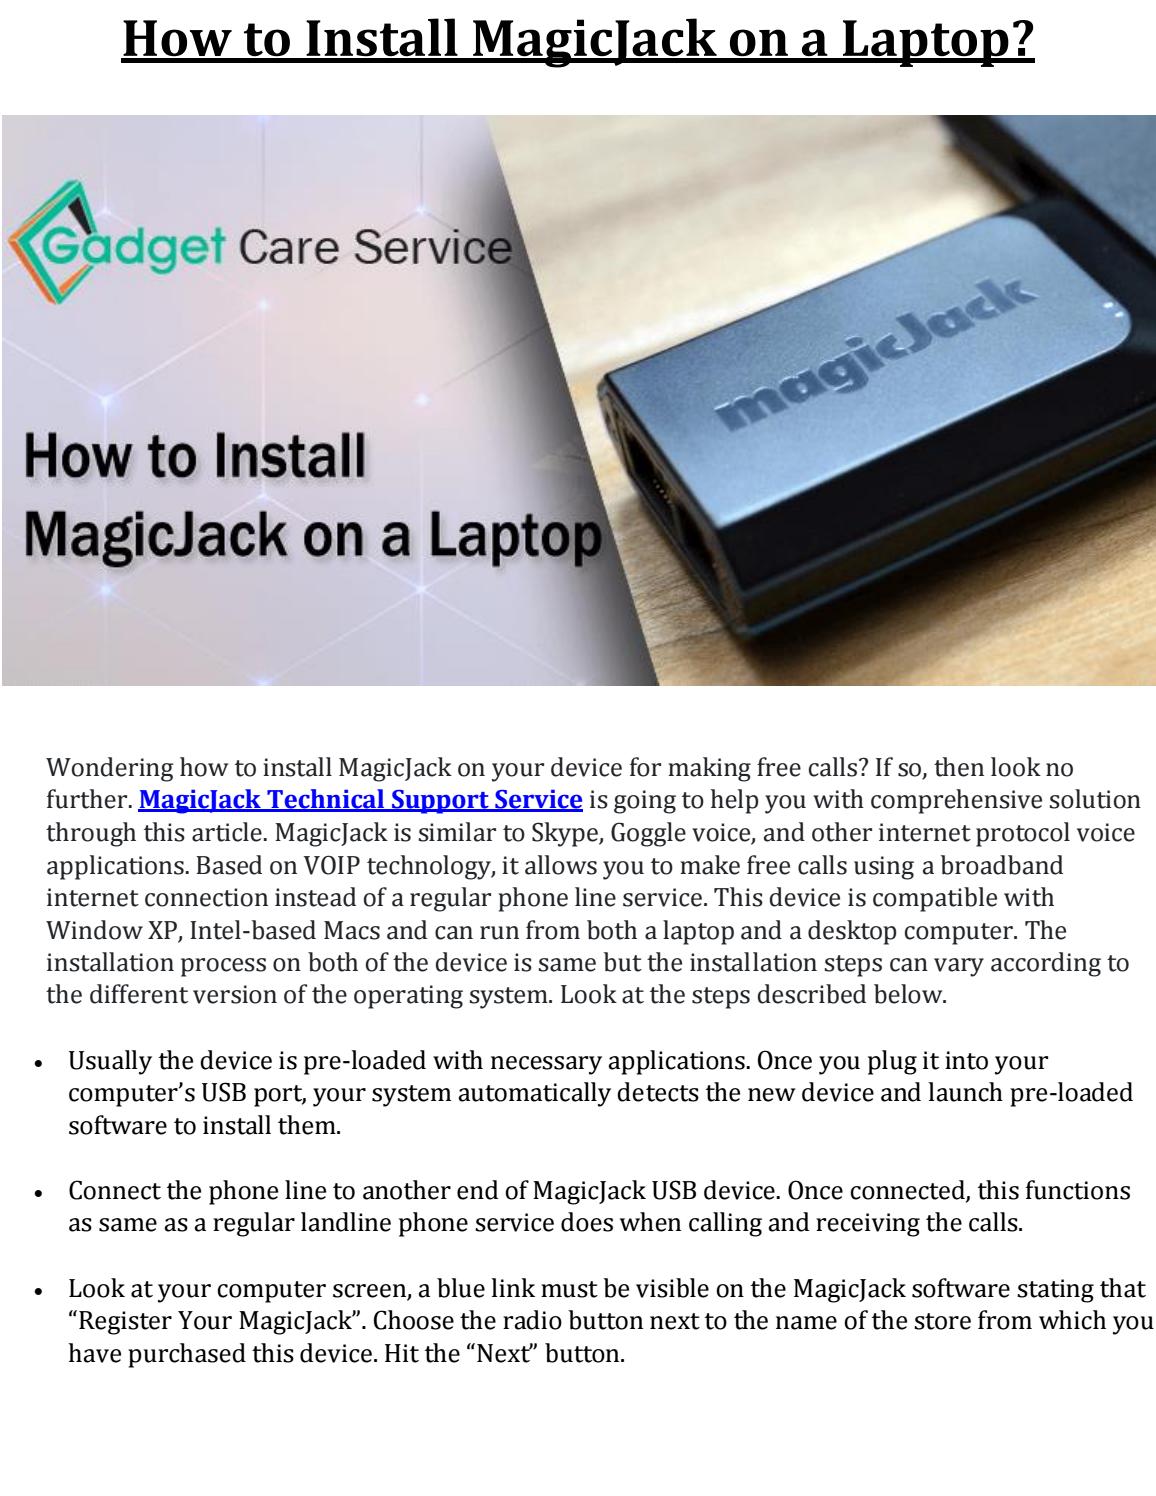 Magicjack i elect to accept free outgoing service